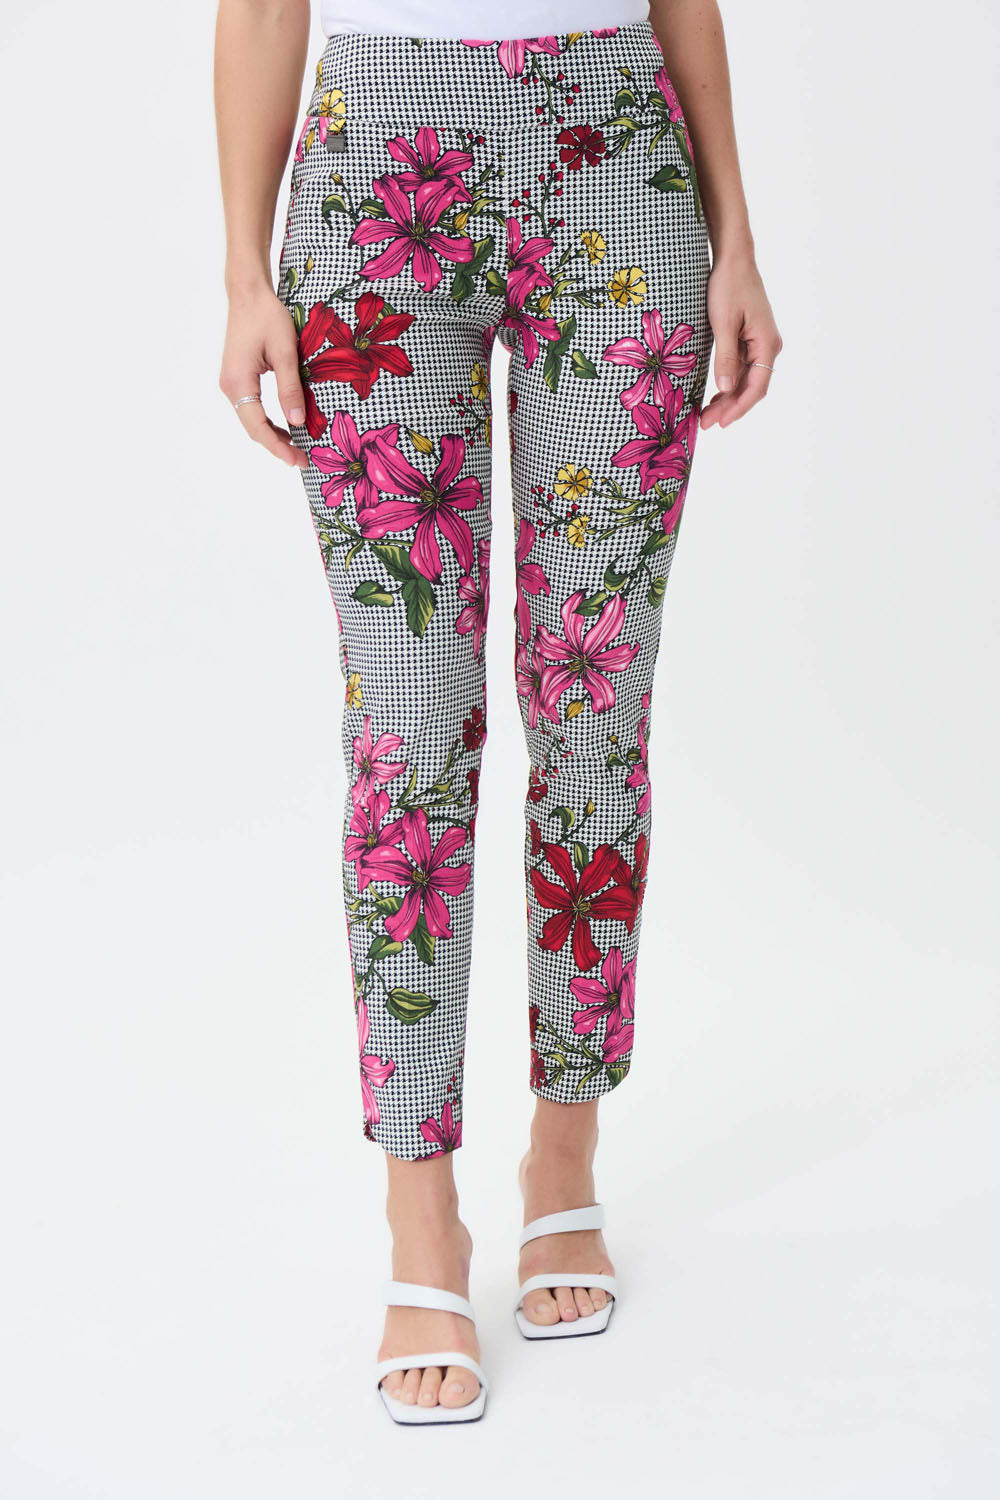 Hobbs Palmer Floral Print Trousers, Green/Ivory at John Lewis & Partners